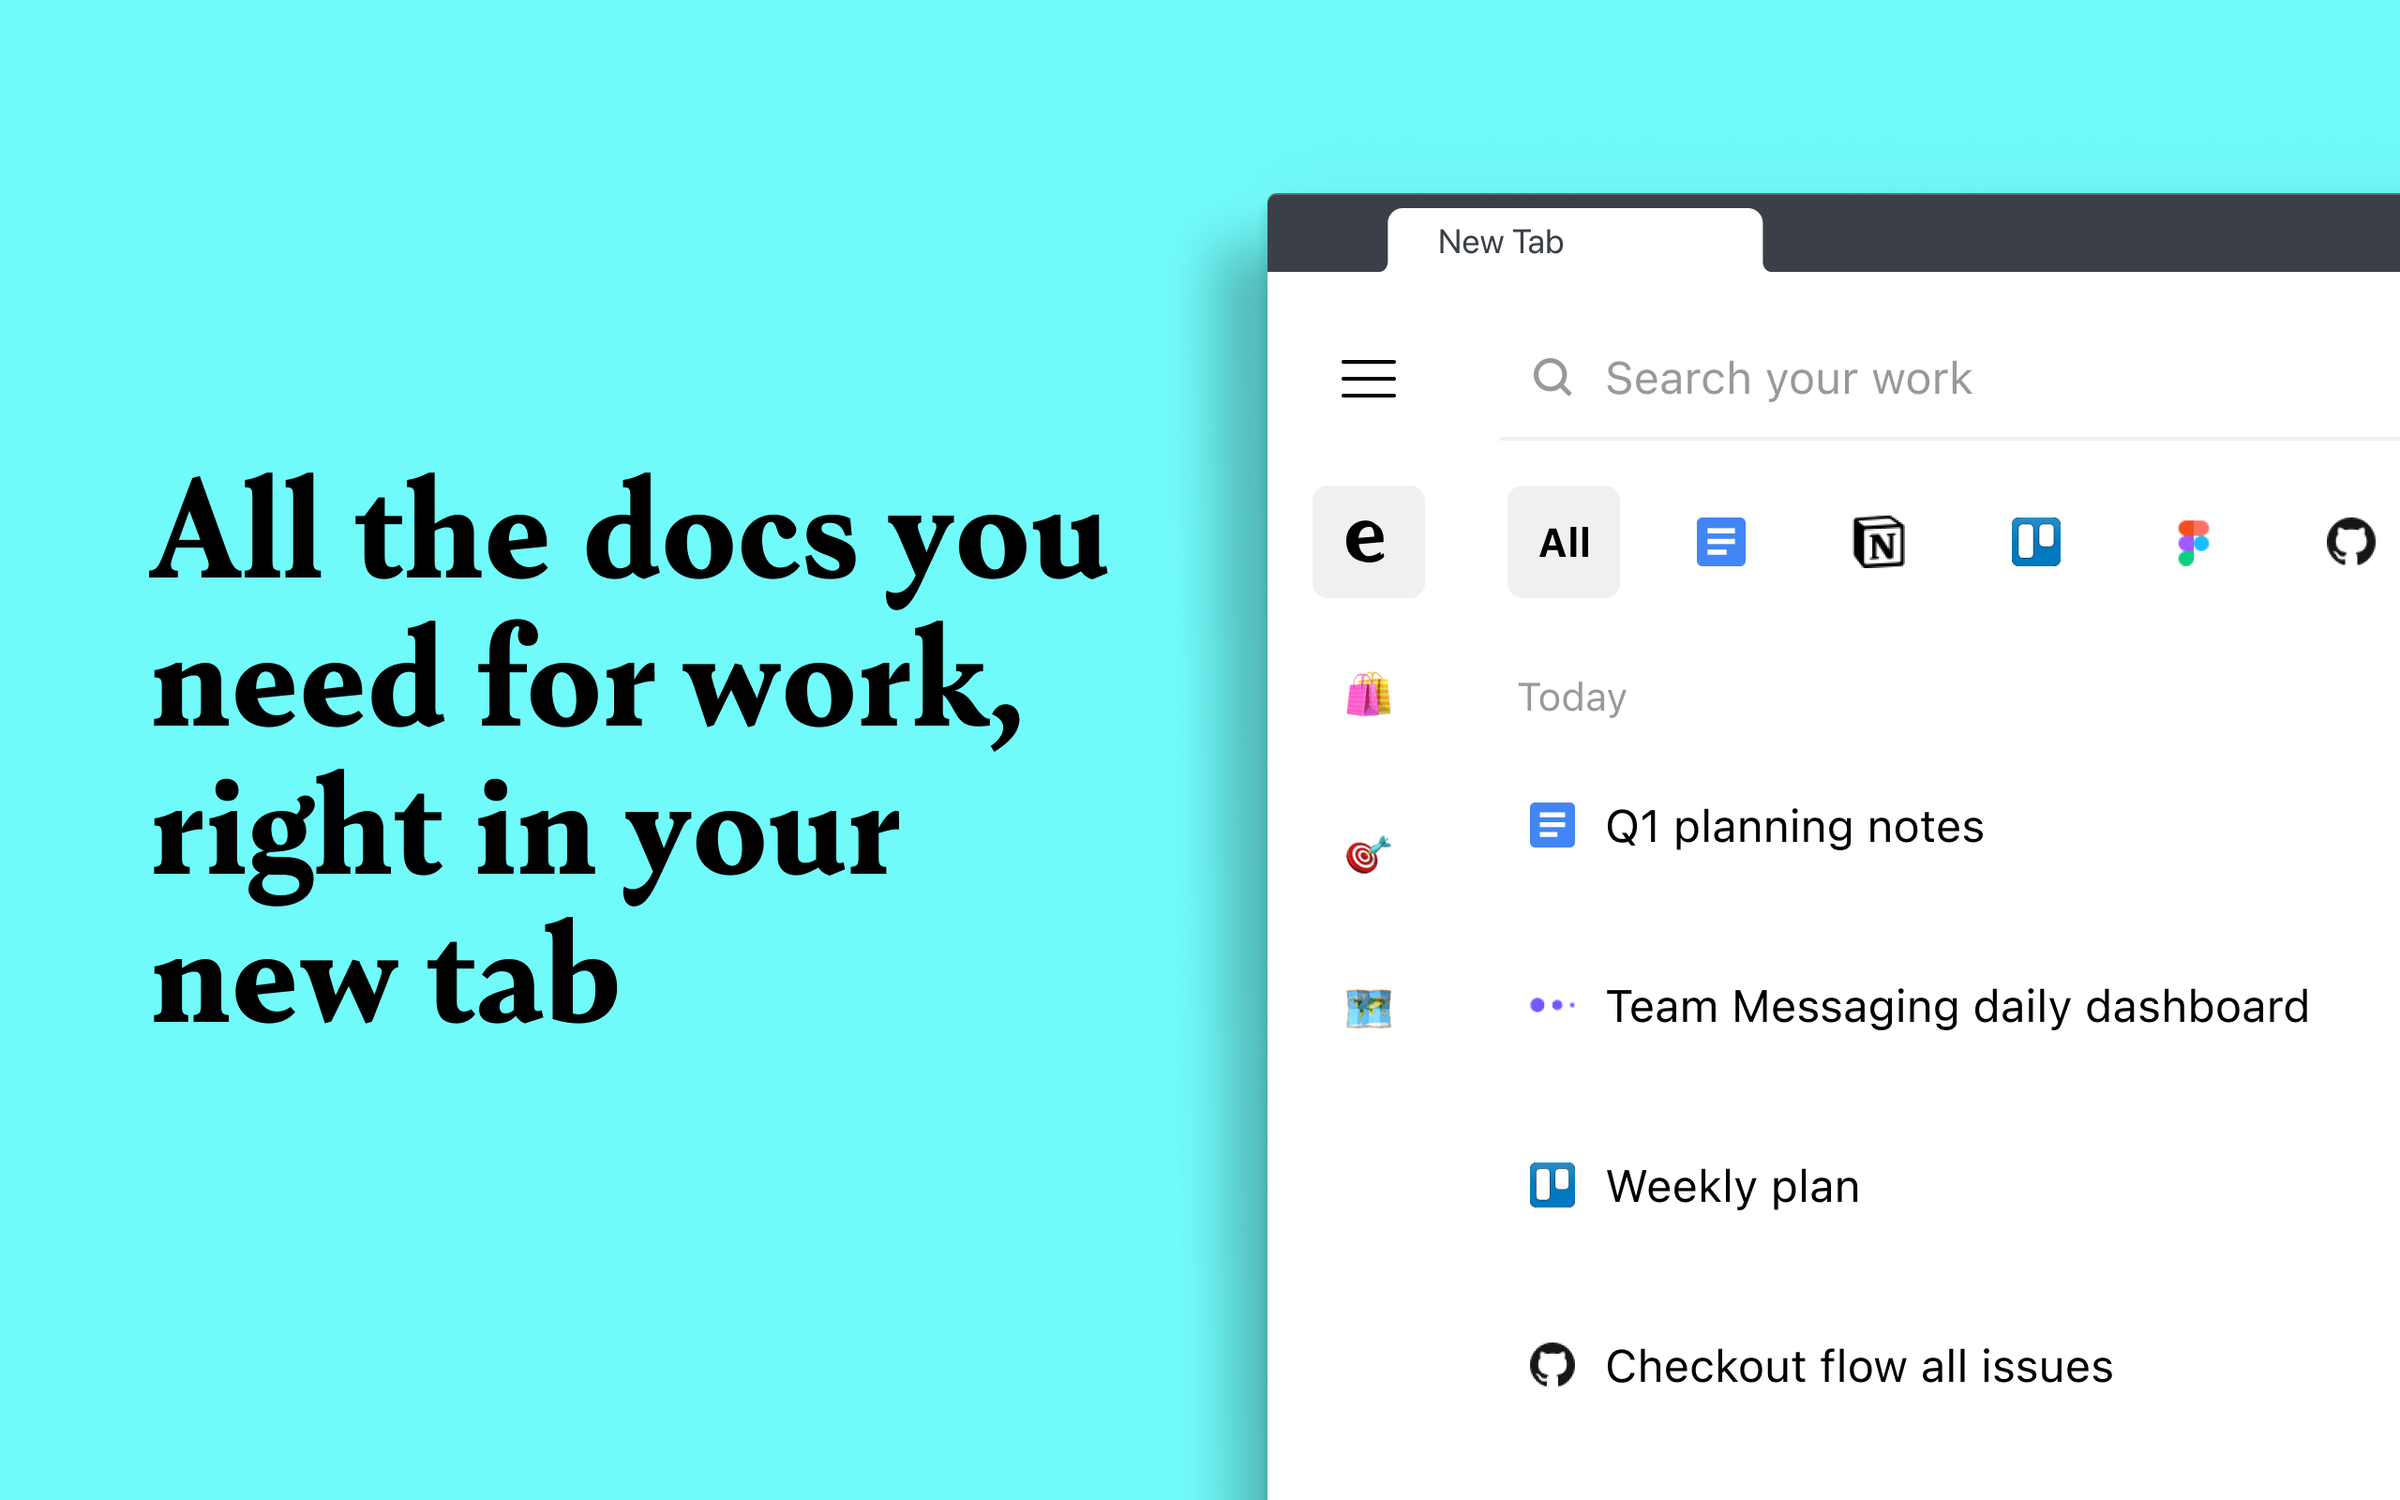 eesel: The new tab for work